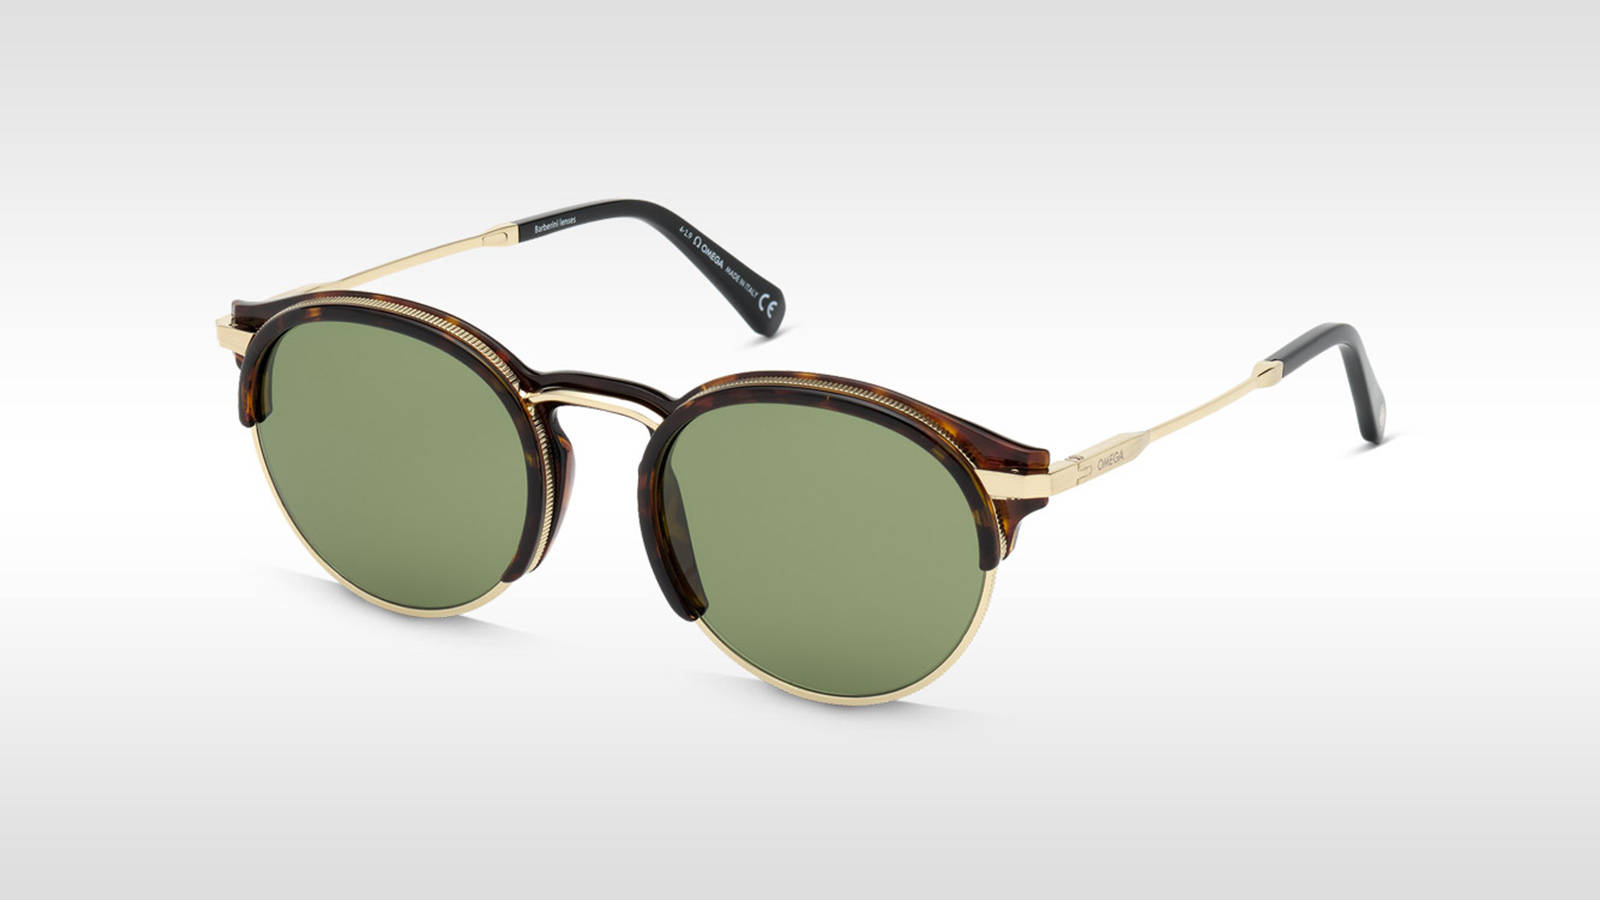 Omega Green Tinted Lenses With Brown Frames Sunglasses Wallpaper